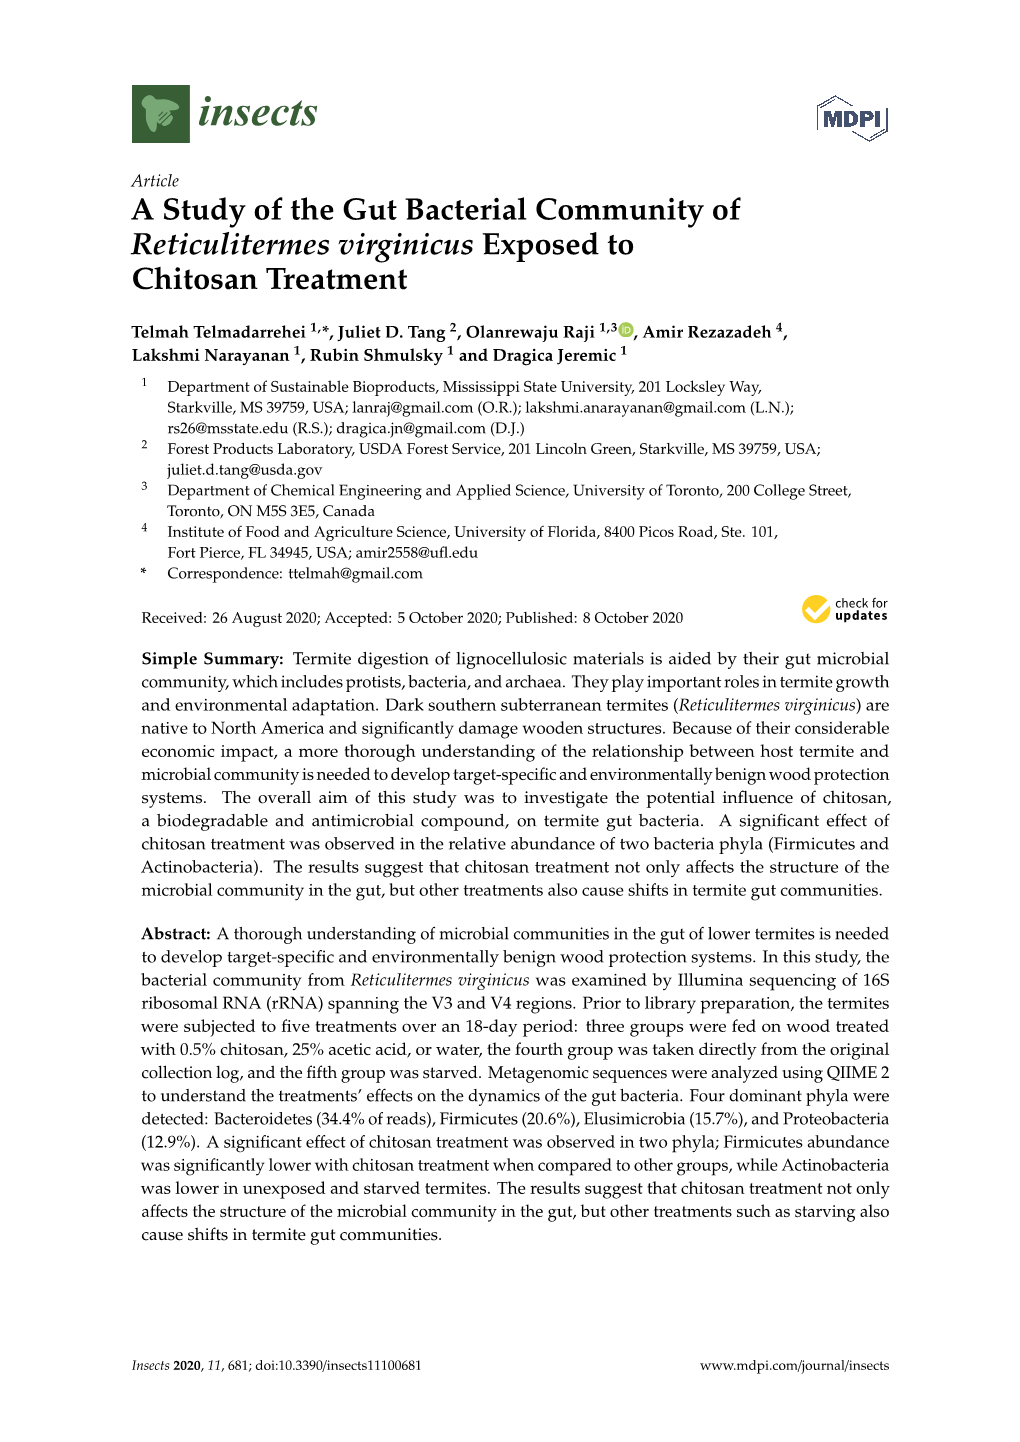 A Study of the Gut Bacterial Community of Reticulitermes Virginicus Exposed to Chitosan Treatment